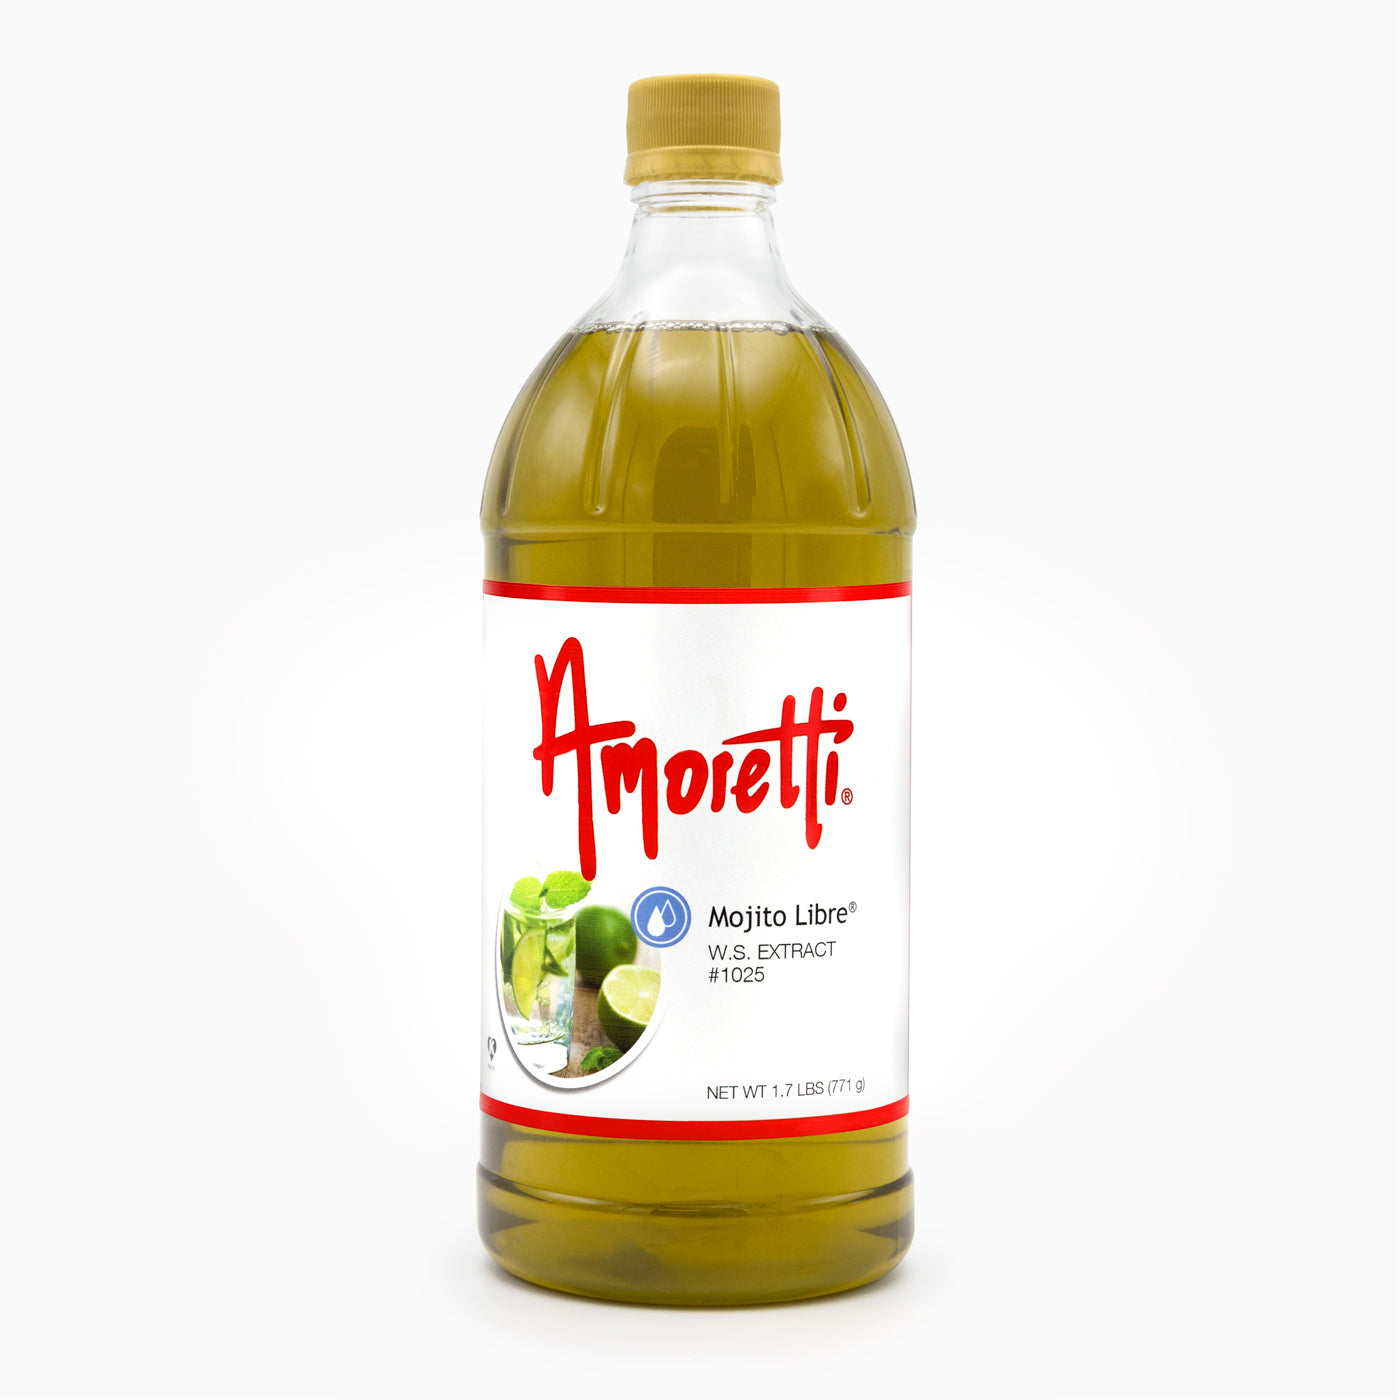 Libre Soluble & Water lime) Mojito Extract (mint — Amoretti